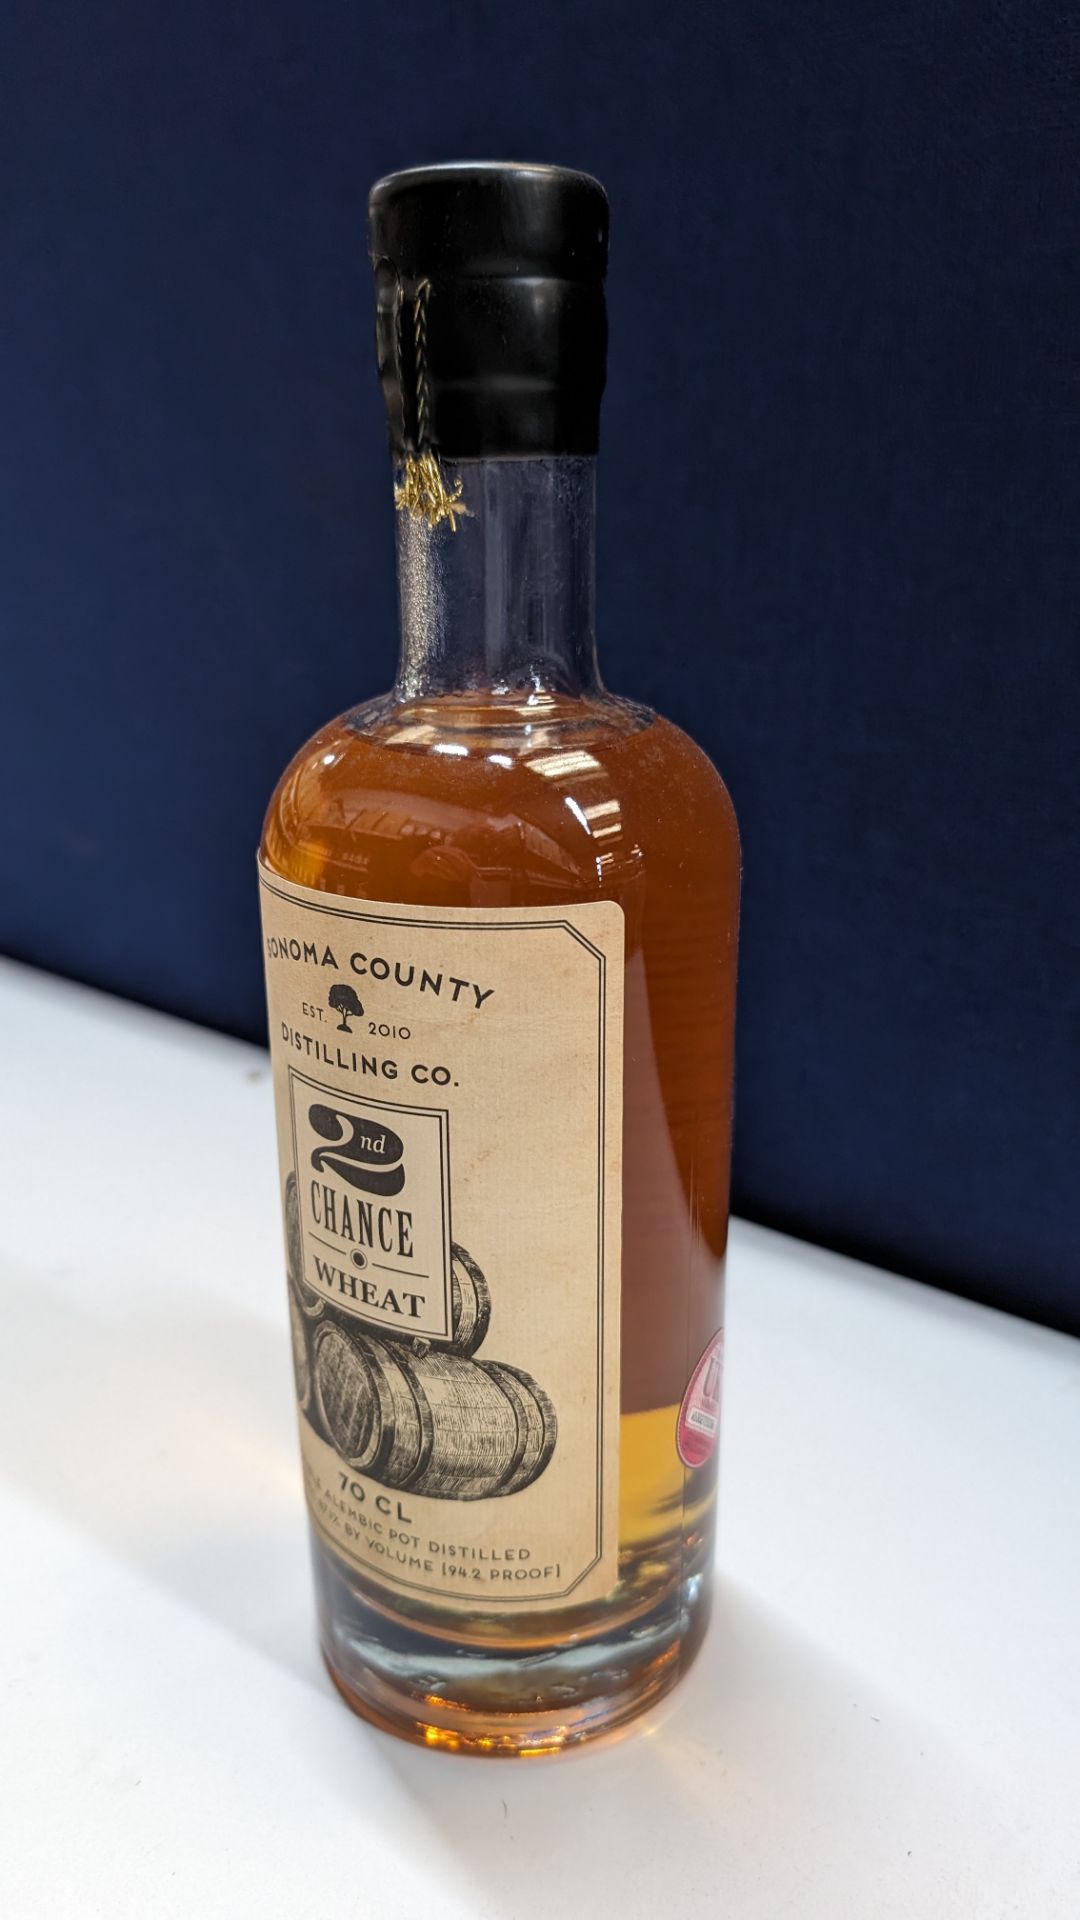 1 off 700ml bottle of Sonoma County 2nd Chance Wheat Double Alembic Pot Distilled Whiskey. 47.1% al - Bild 2 aus 6